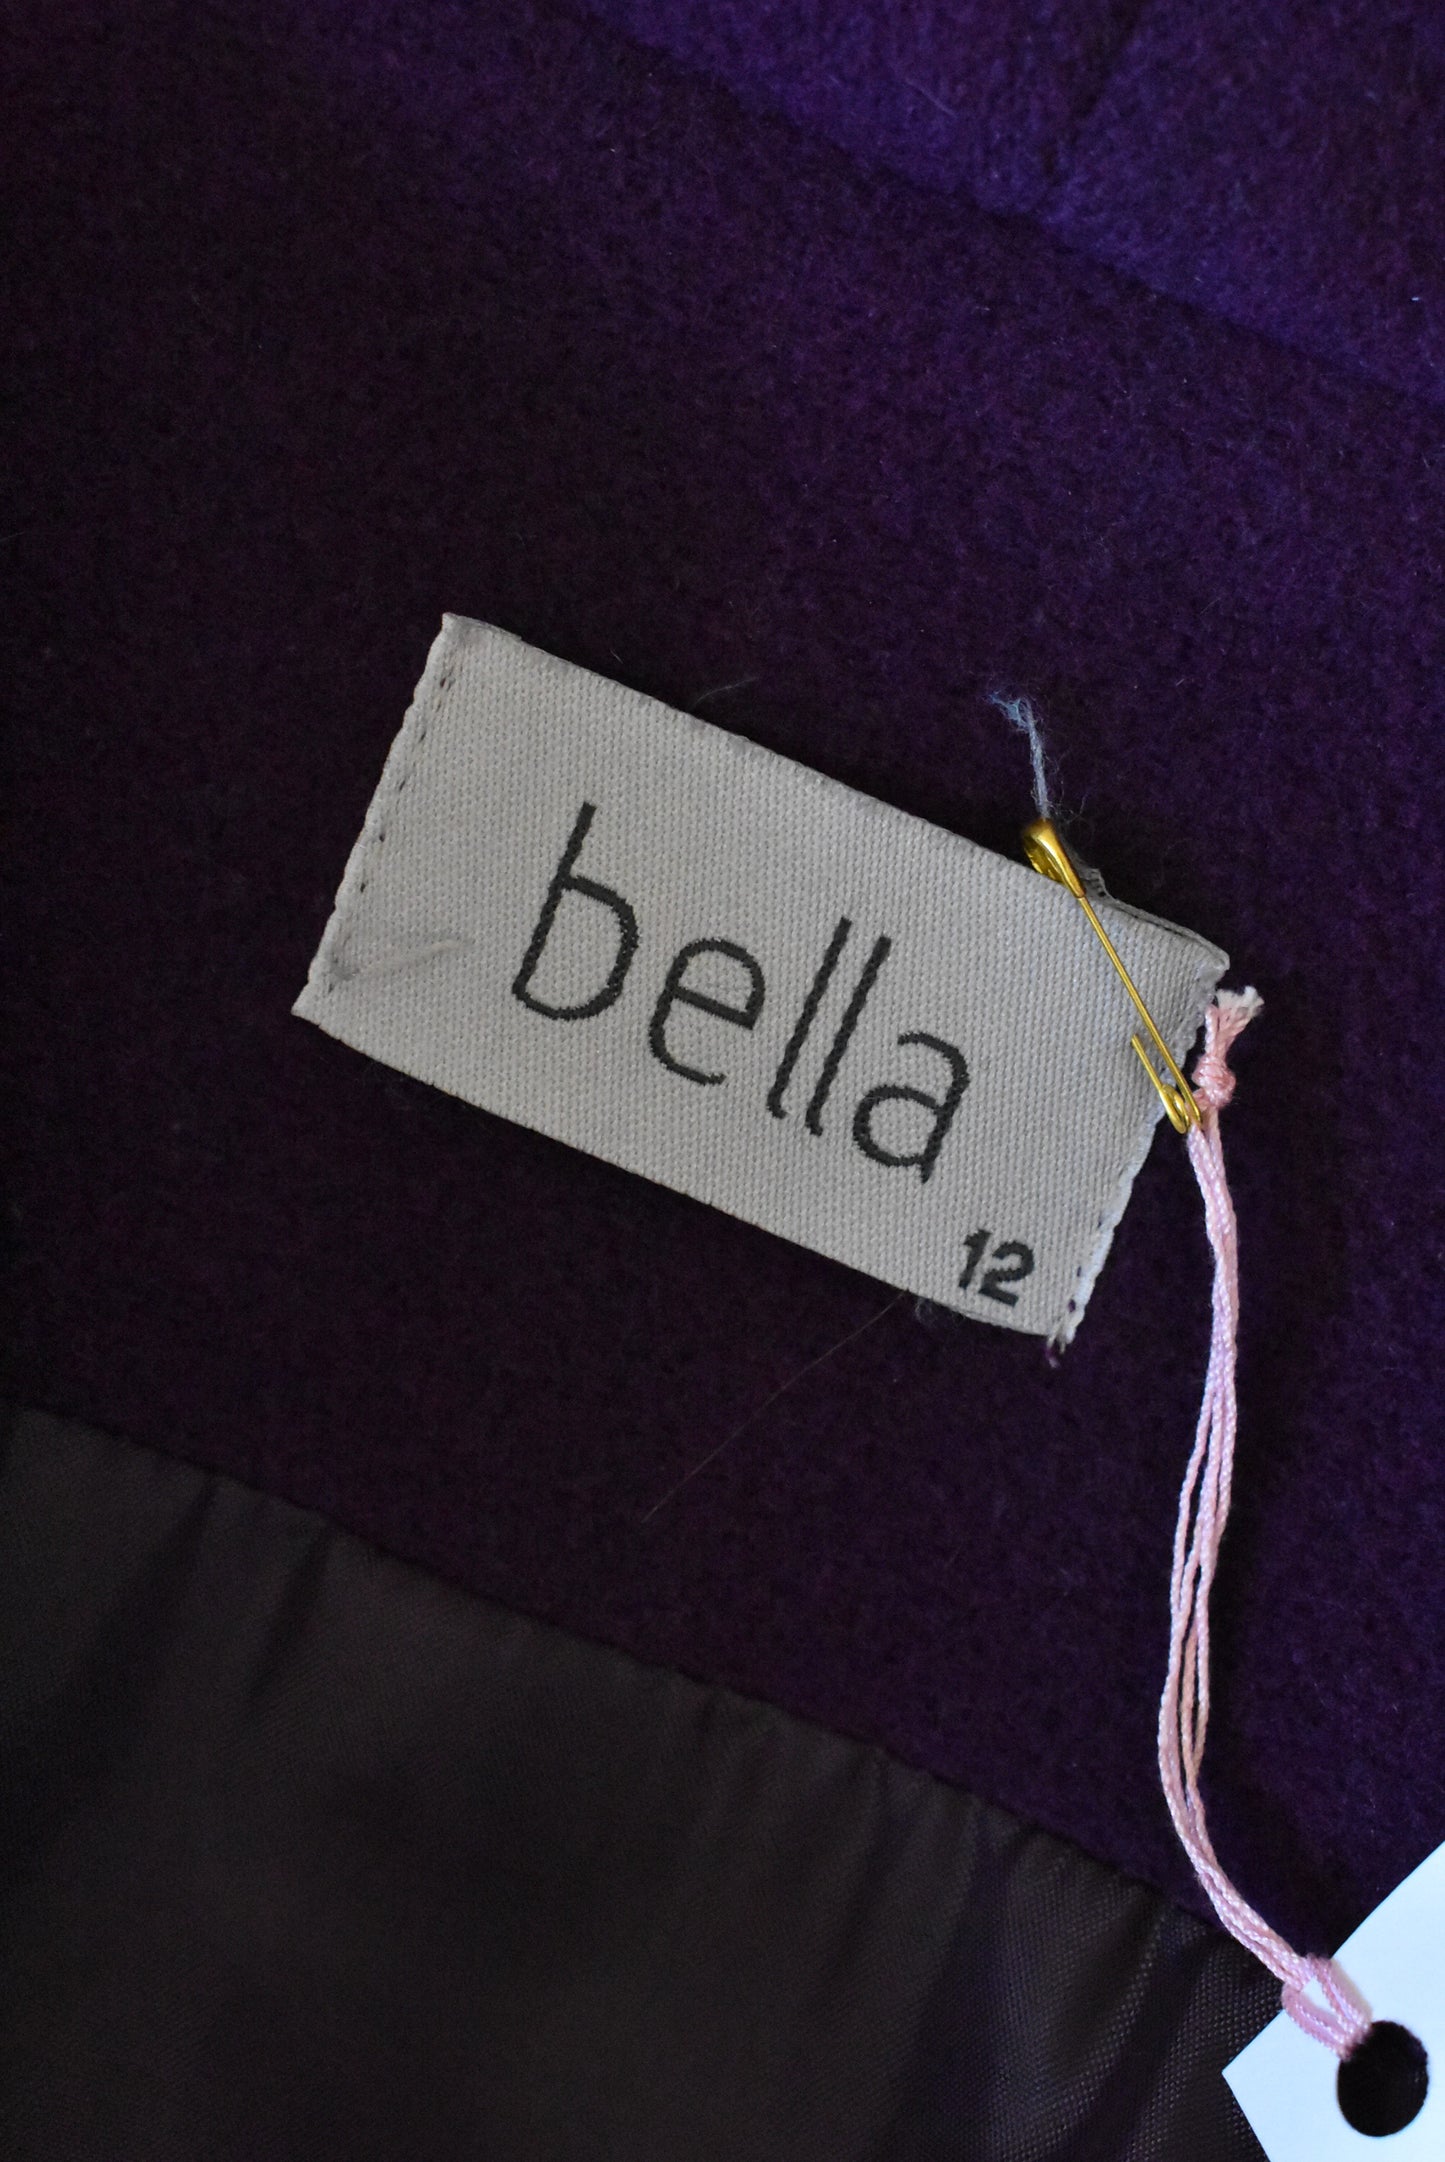 Bella wool and cashmere coat, 12